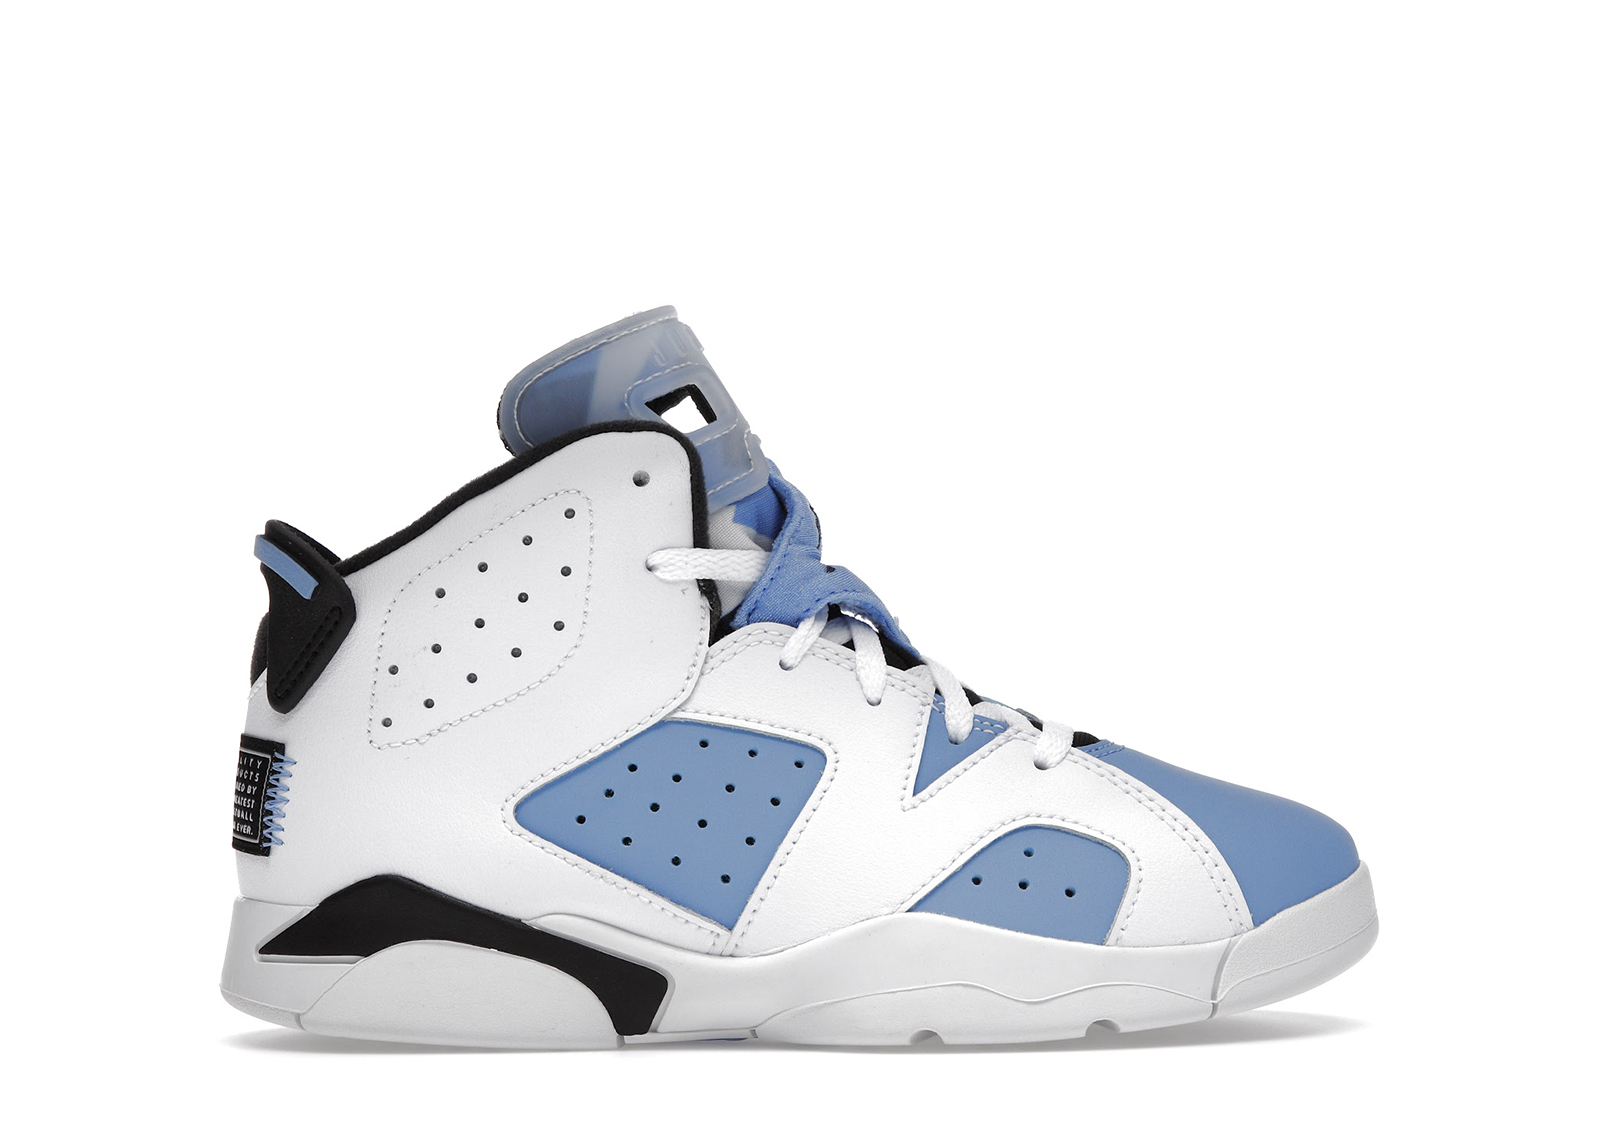 Jordan 6 - All Sizes & Colorways from $54 at StockX